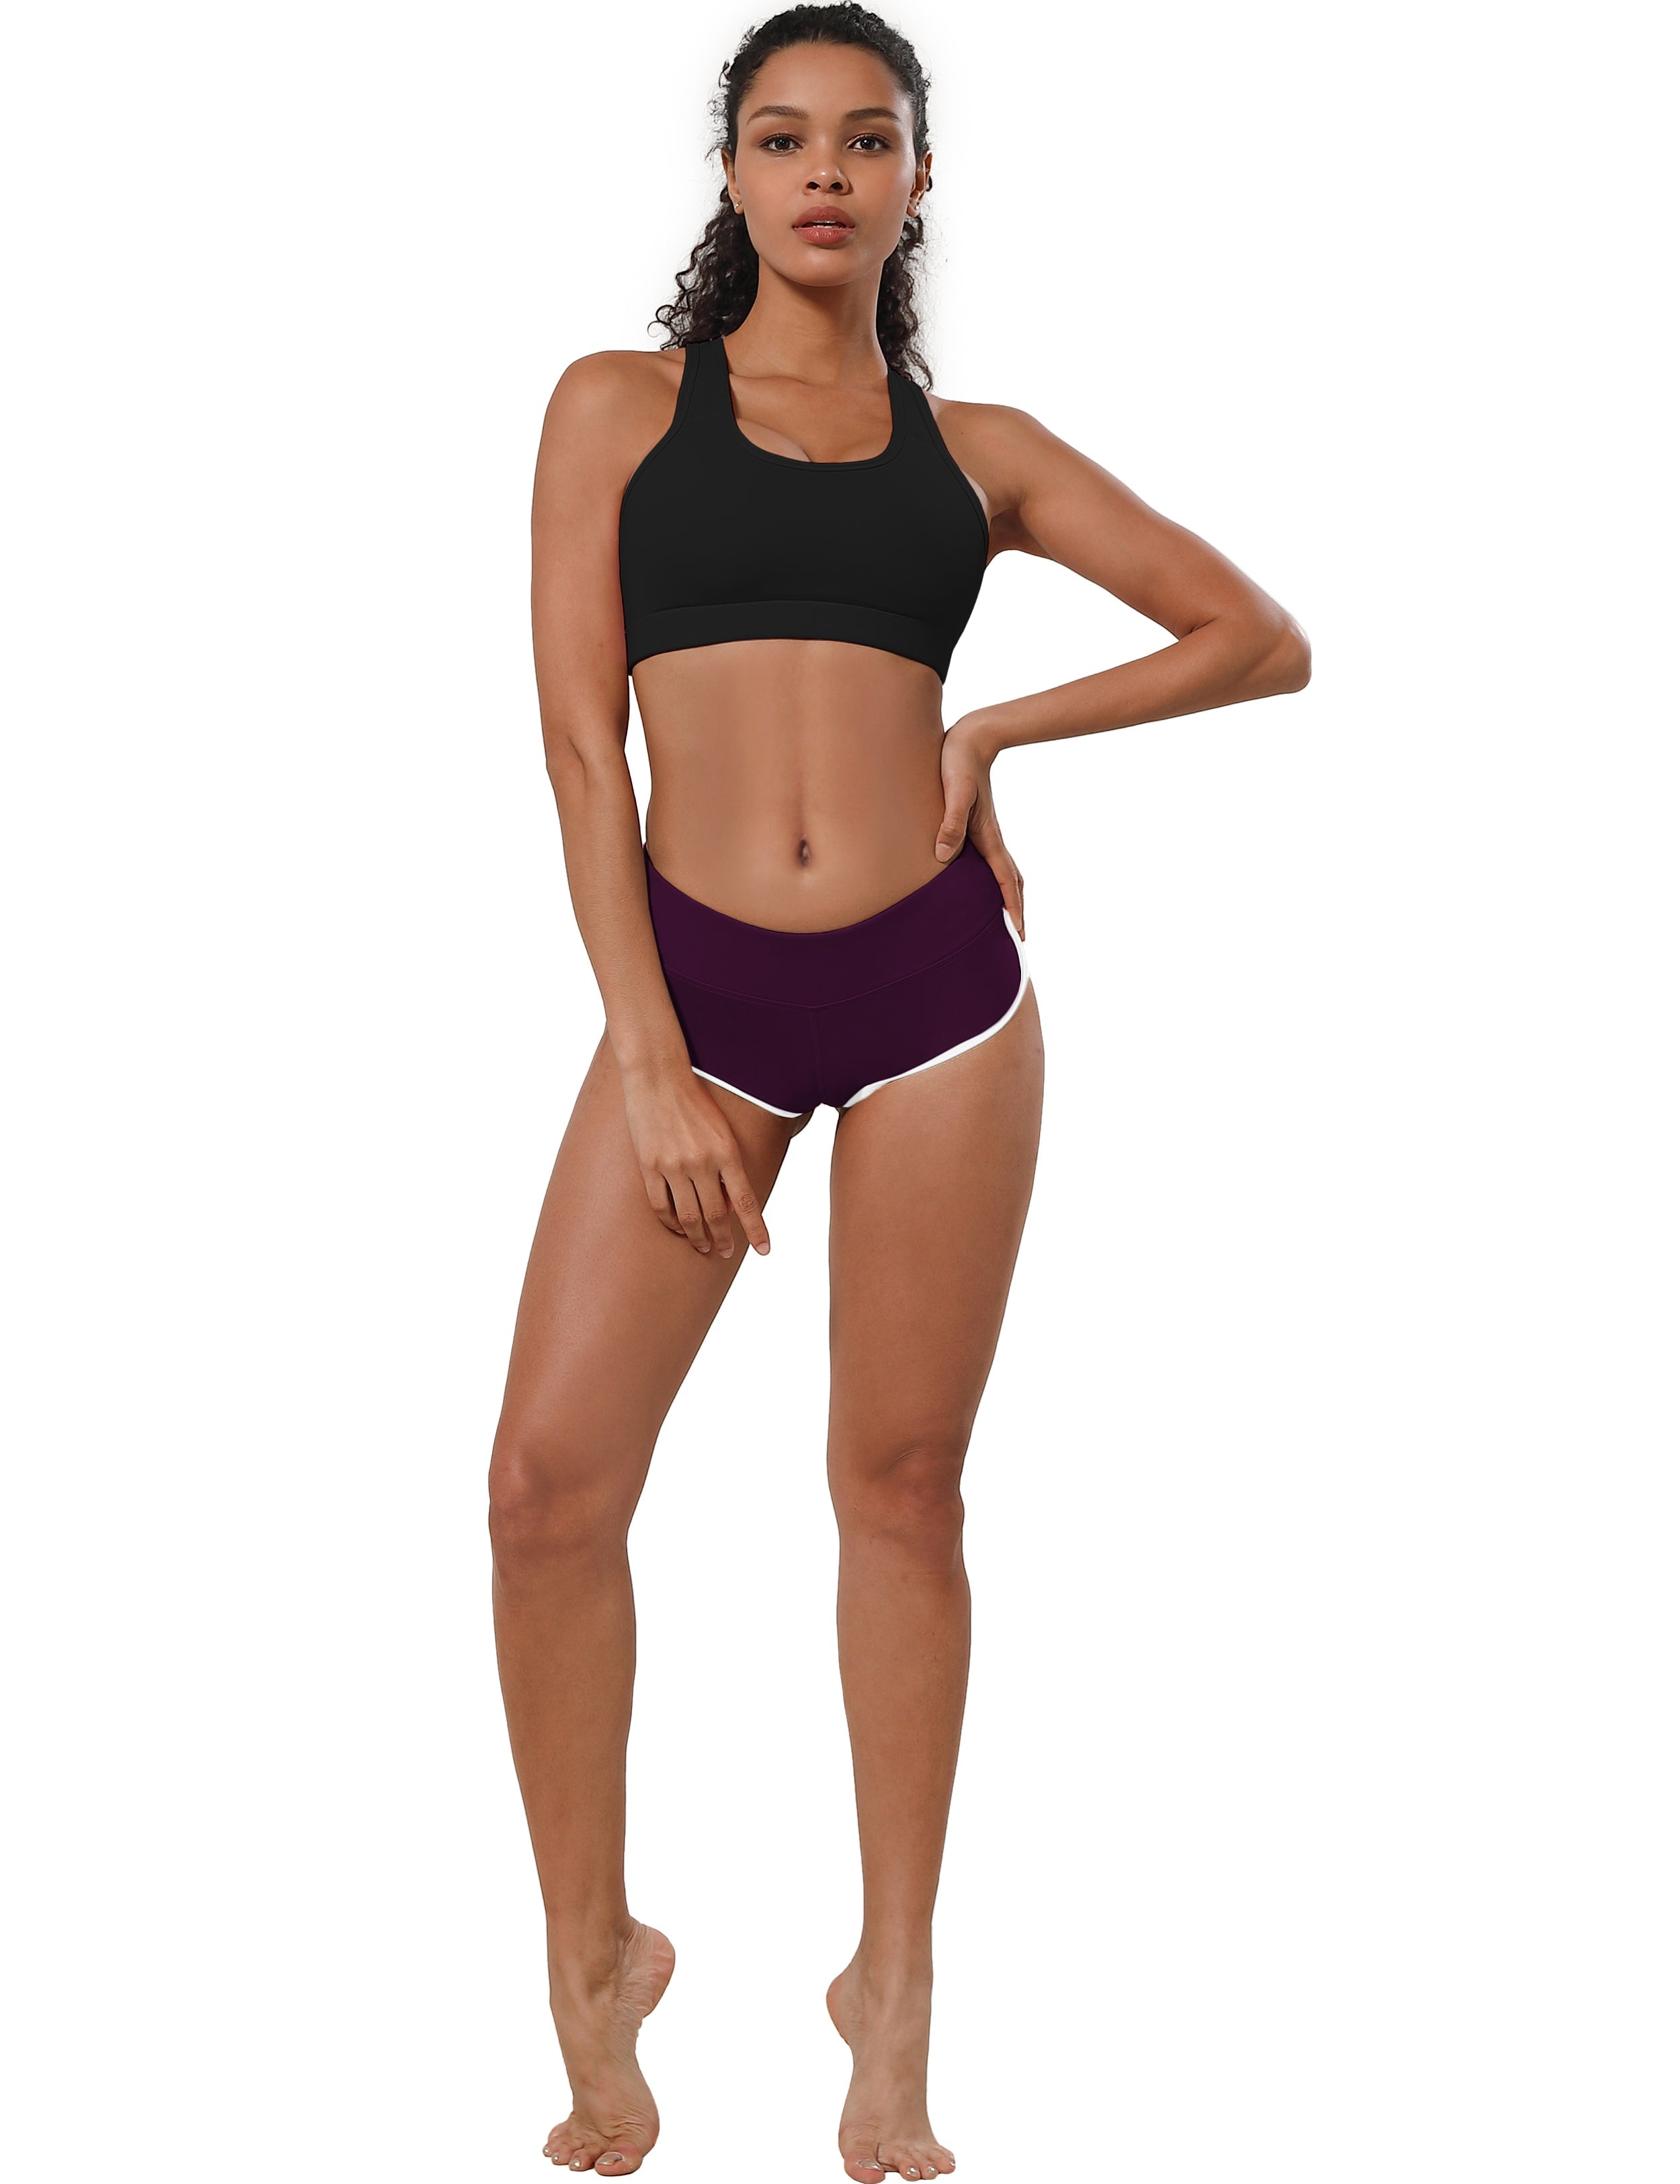 Sexy Booty Jogging Shorts plum Sleek, soft, smooth and totally comfortable: our newest sexy style is here. Softest-ever fabric High elasticity High density 4-way stretch Fabric doesn't attract lint easily No see-through Moisture-wicking Machine wash 75%Nylon/25%Spandex